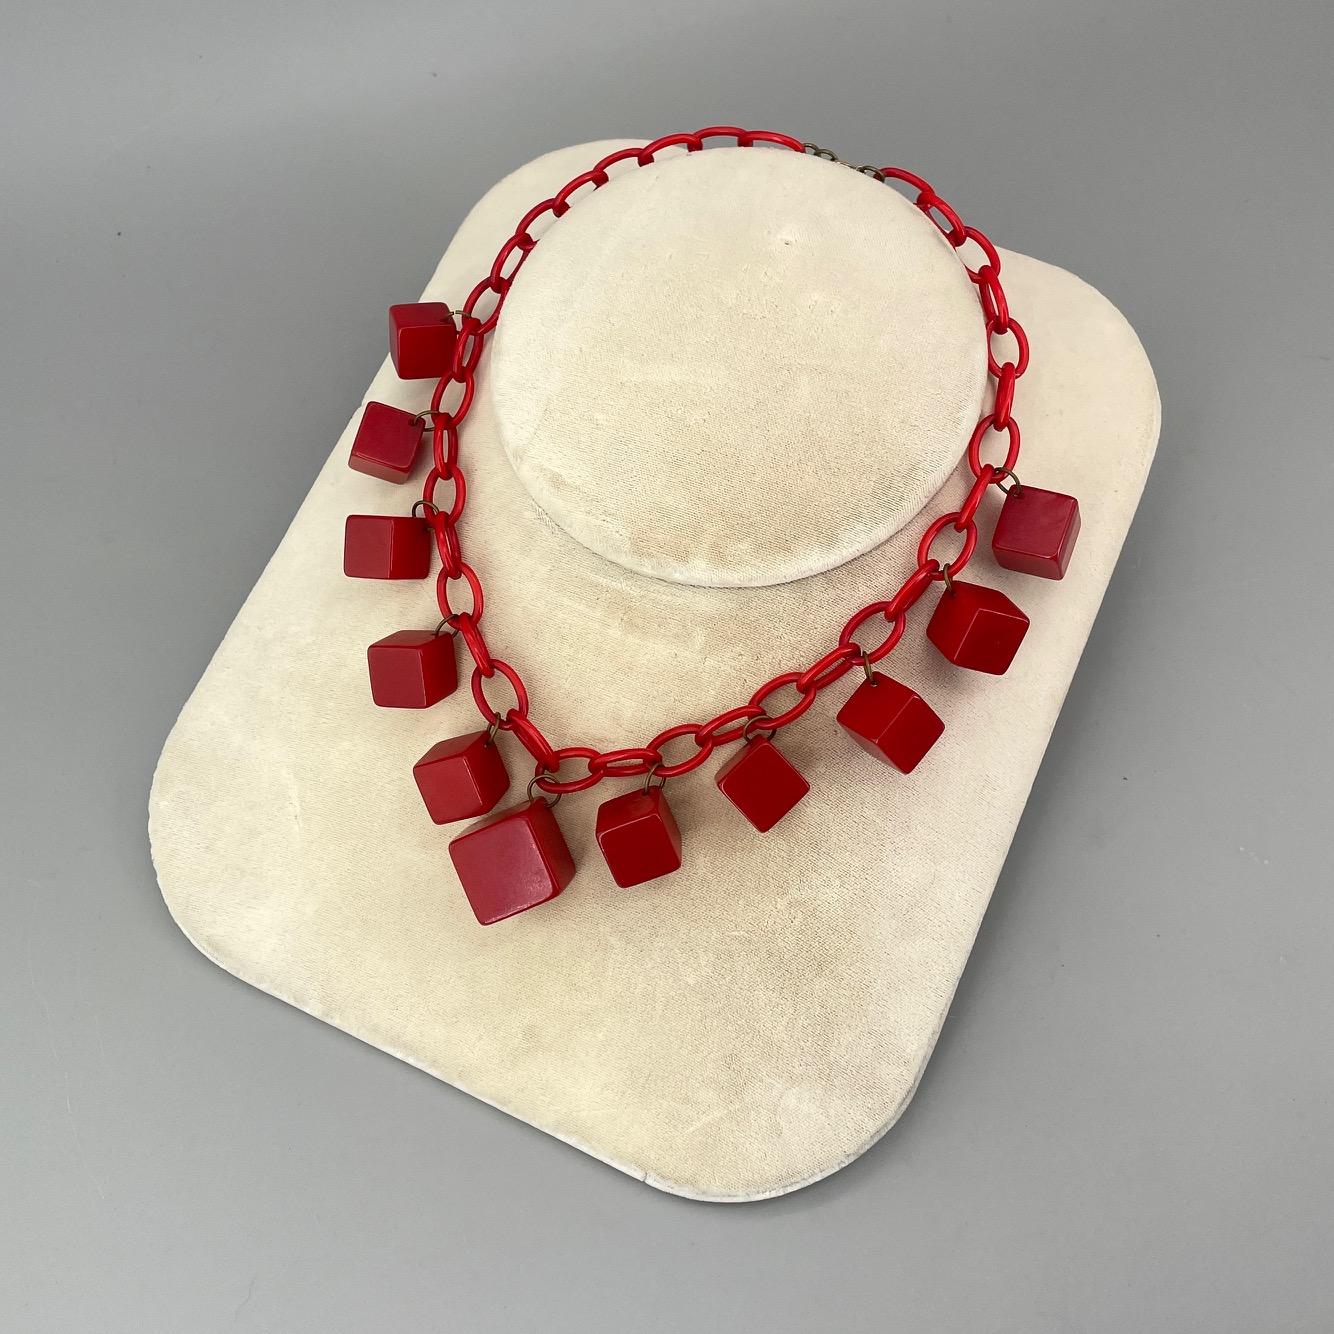 Hand-Crafted Antique Bakelite Nº11 Cubist NYC Art Deco Cherry Red Charm Necklace  For Sale